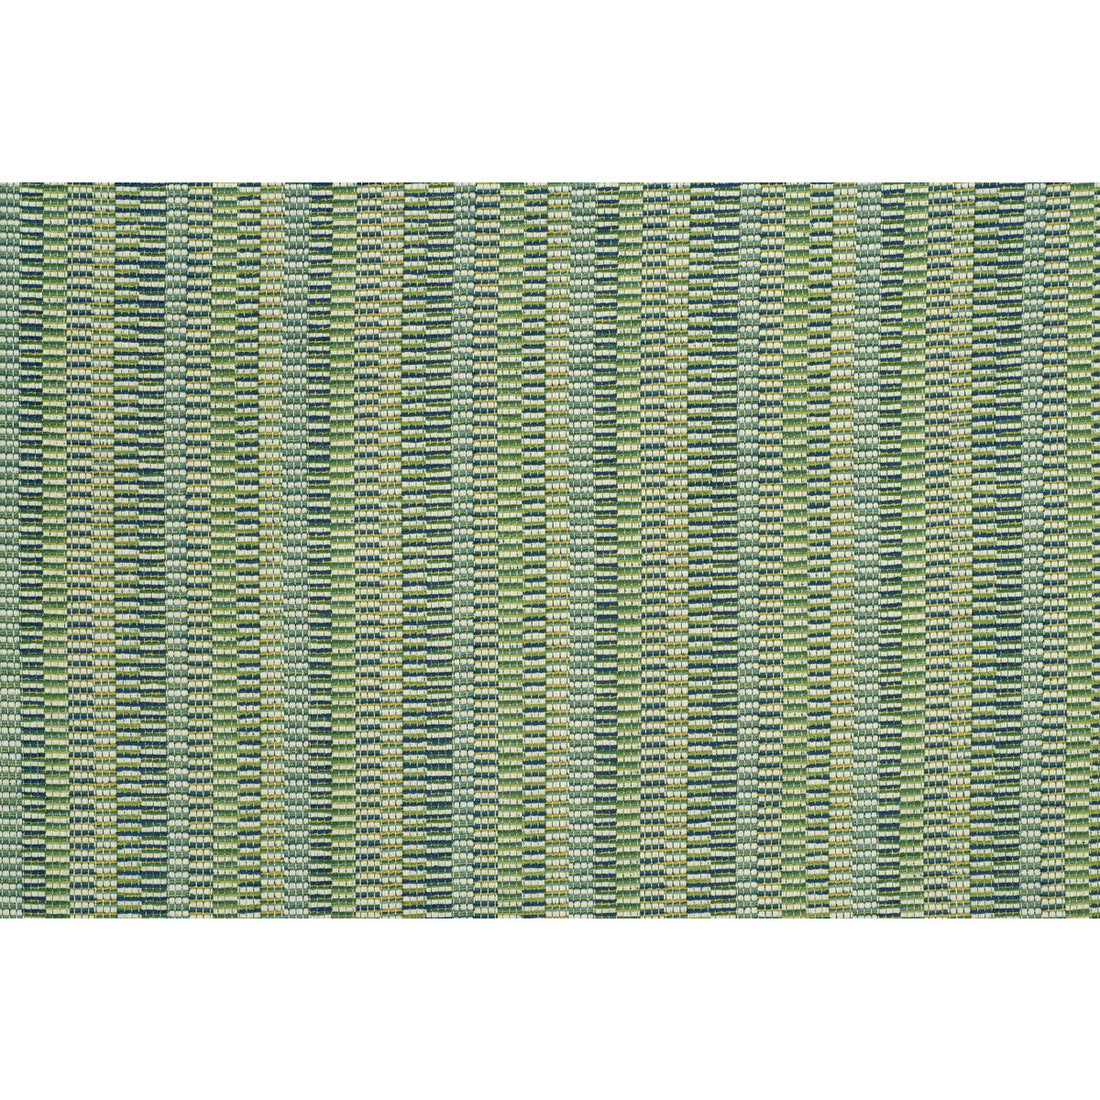 Kravet Design fabric in 34694-35 color - pattern 34694.35.0 - by Kravet Design in the Crypton Home collection